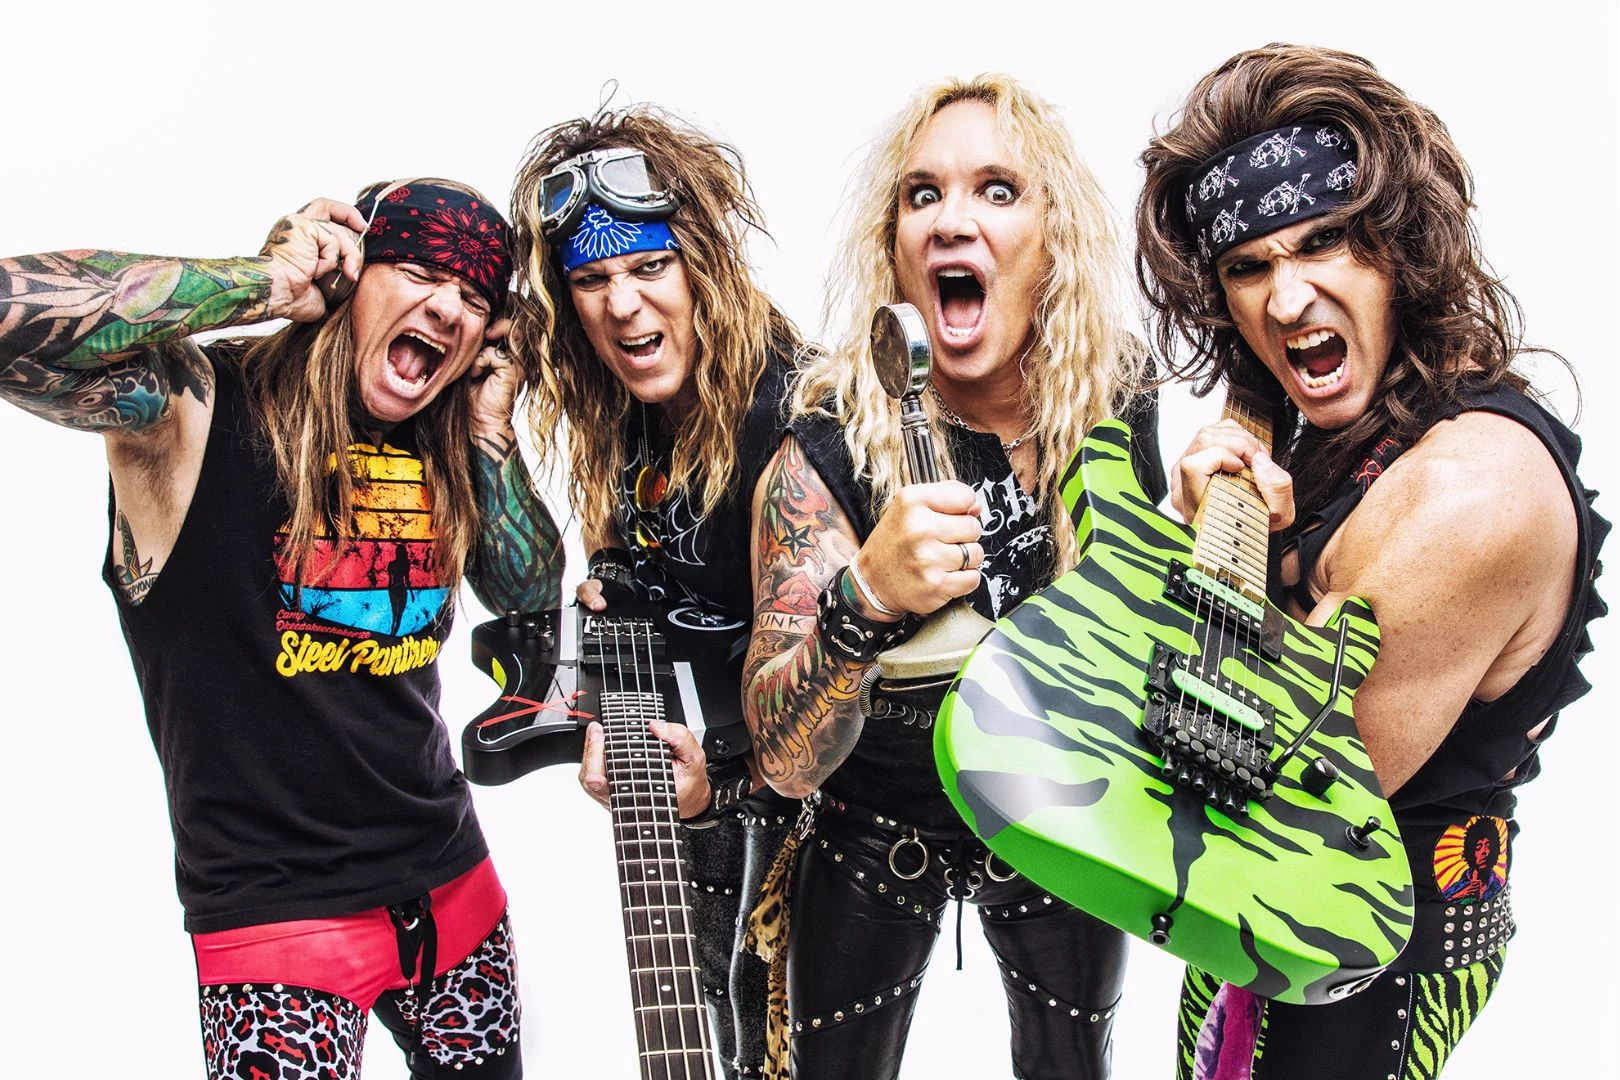 Steel Panther 1987 Video Is Ultimate 80s Tribute, Except For..